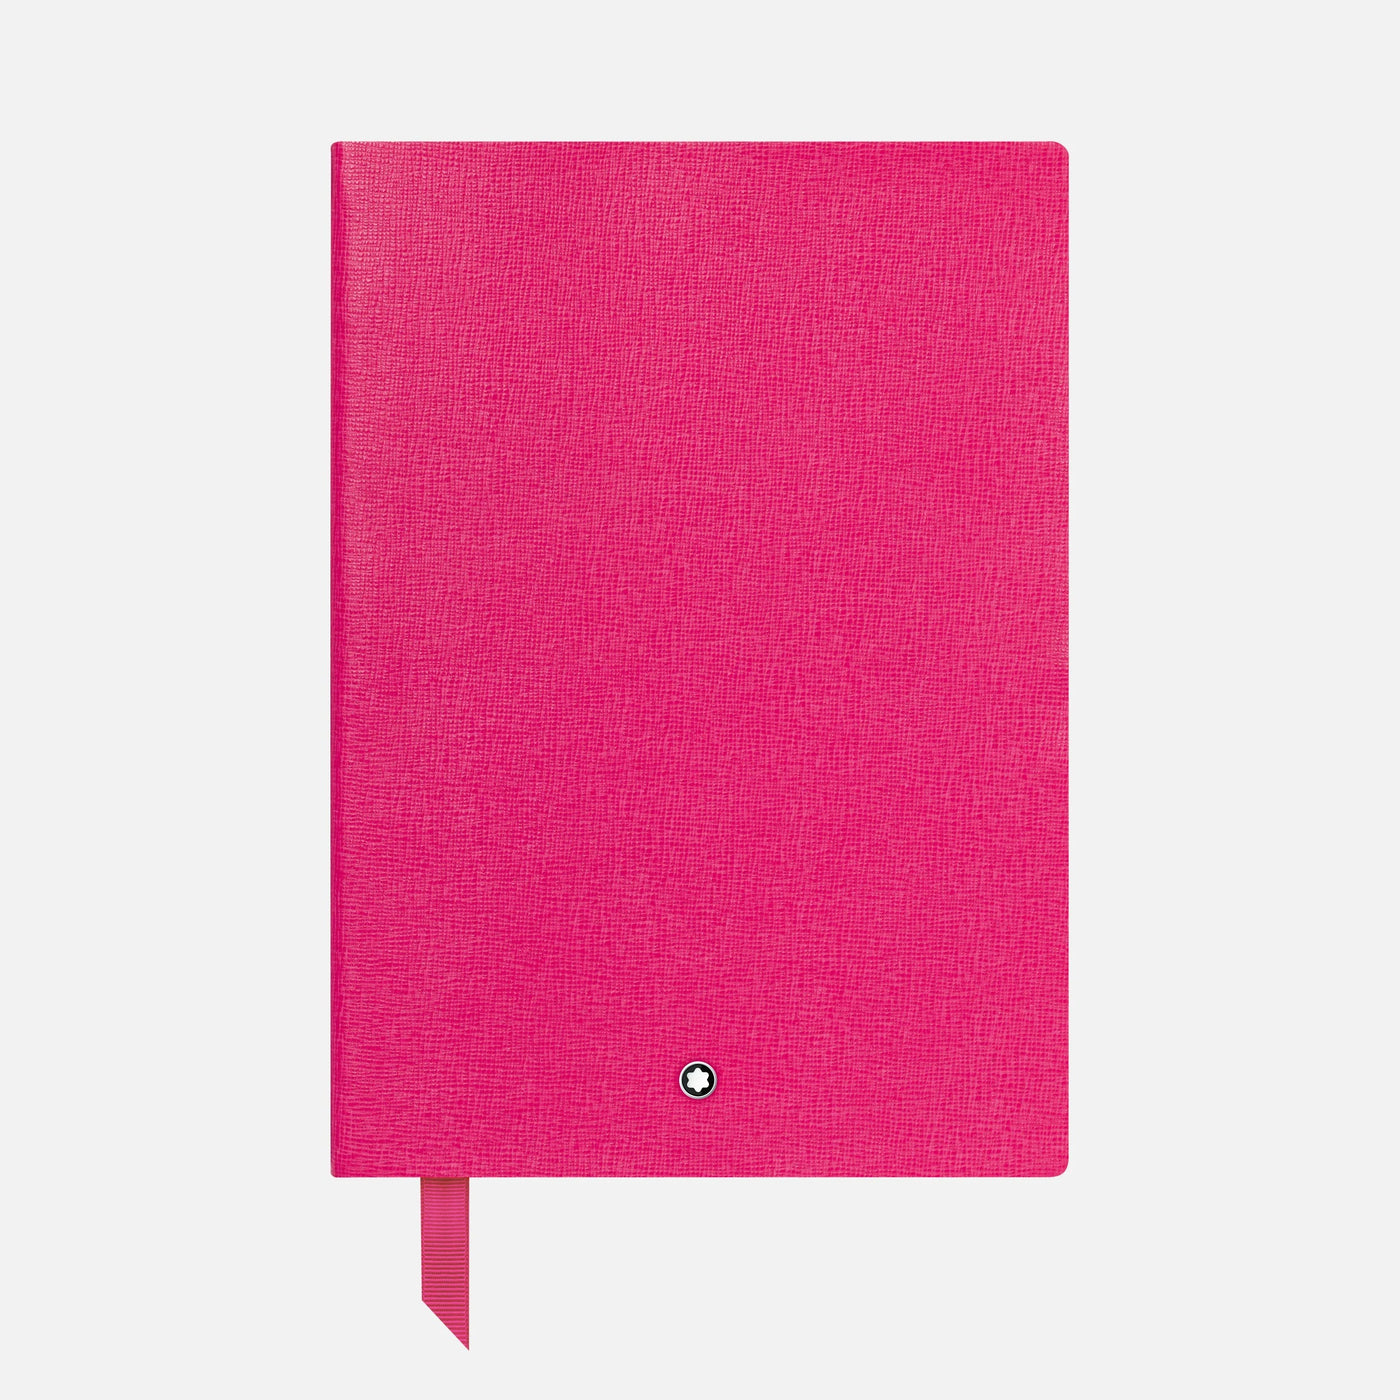 Montblanc Fine Stationery #146 Pink Lined Notebook